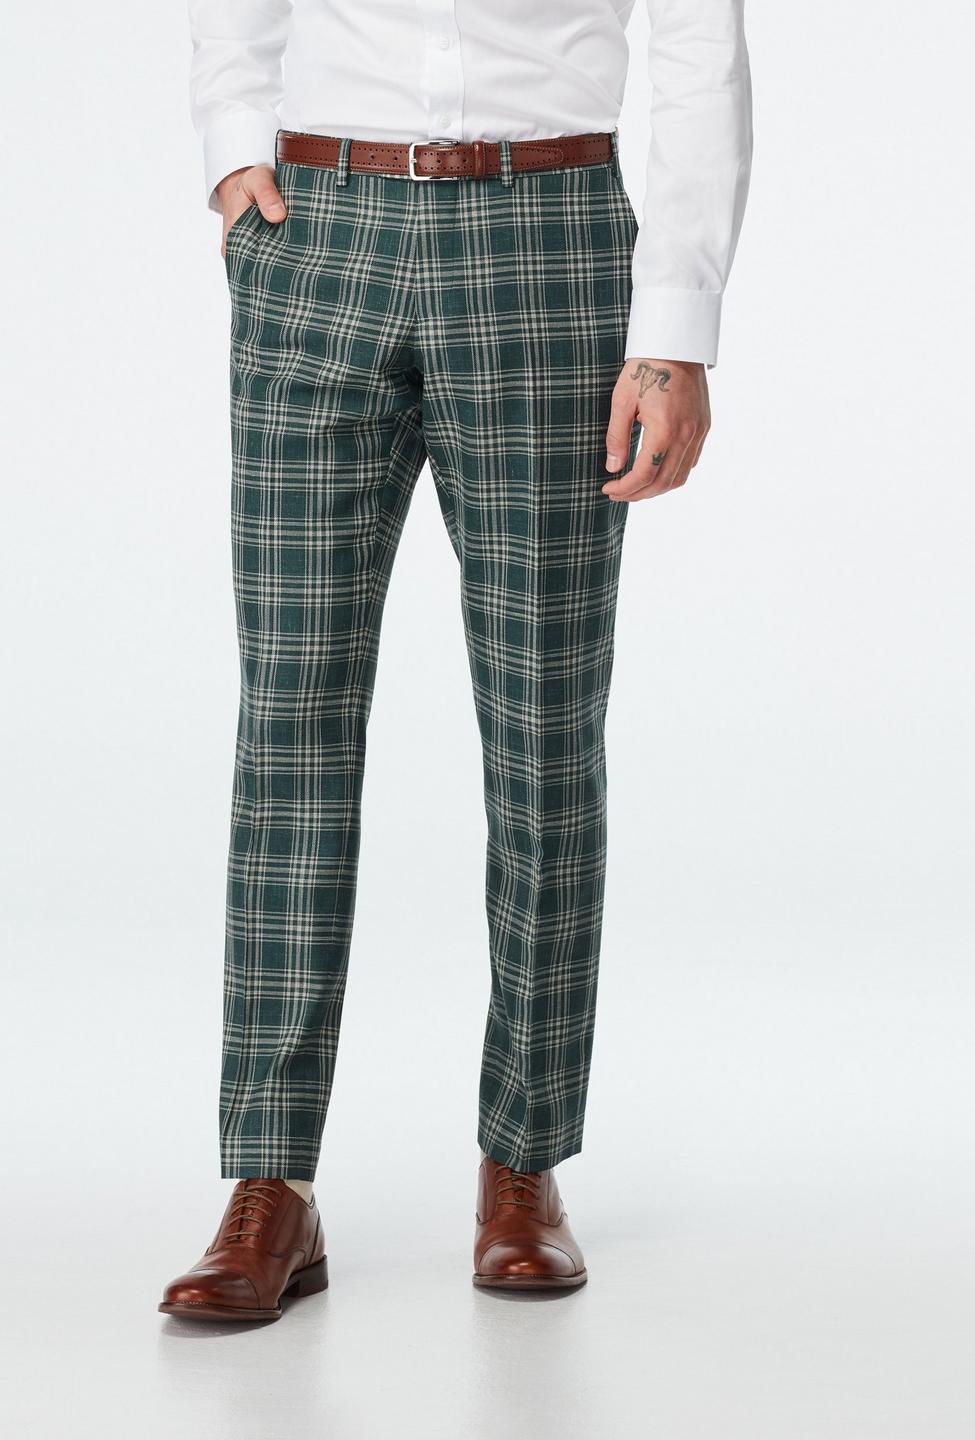 Green pants - Stone Plaid Design from Seasonal Indochino Collection